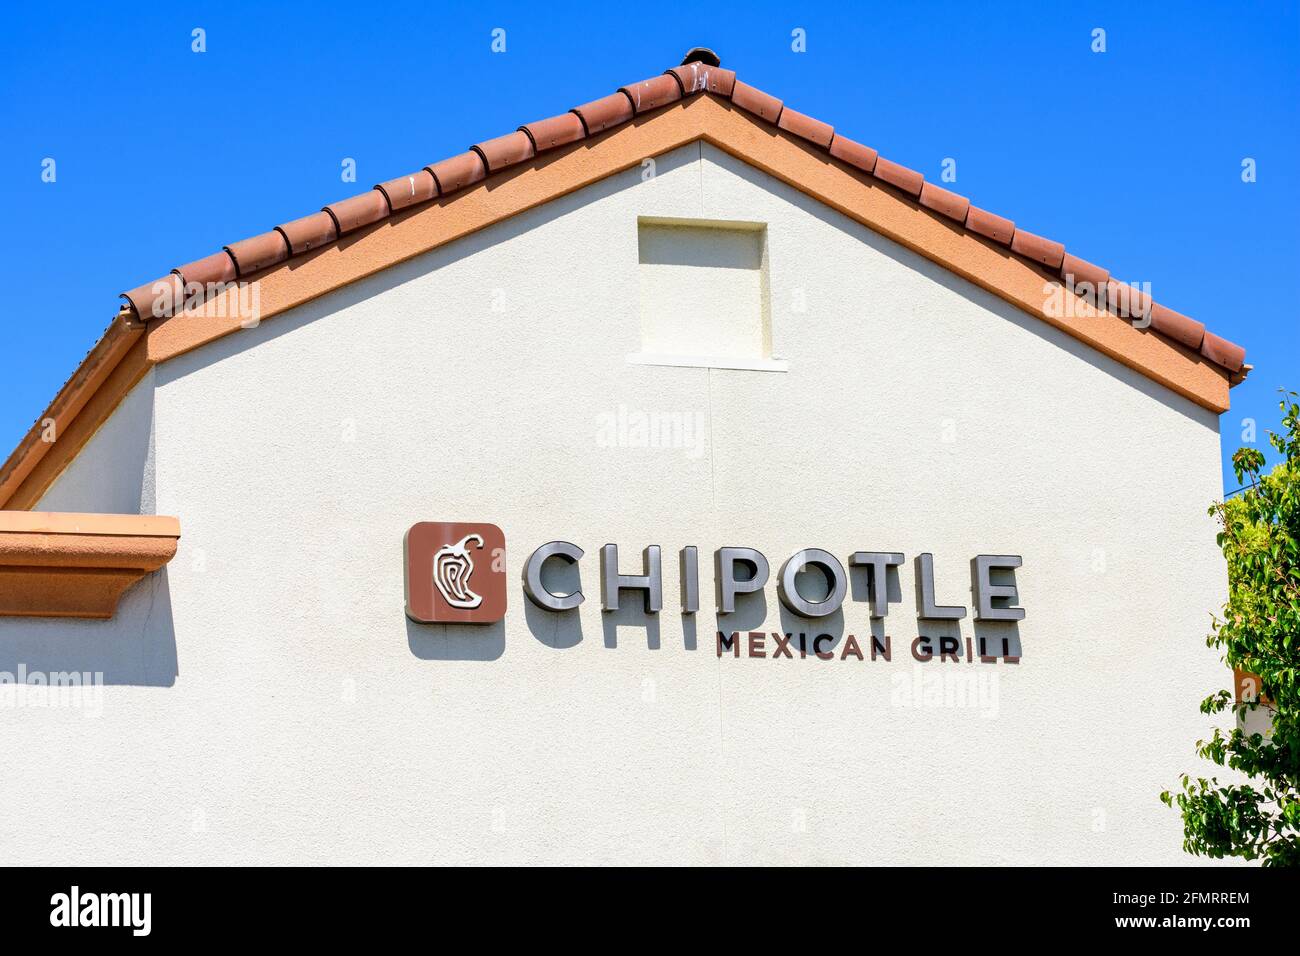 Chipotle Mexican Grill sign and logo above the entrance to chain restaurant location - San Jose California, USA - 2021 Stock Photo